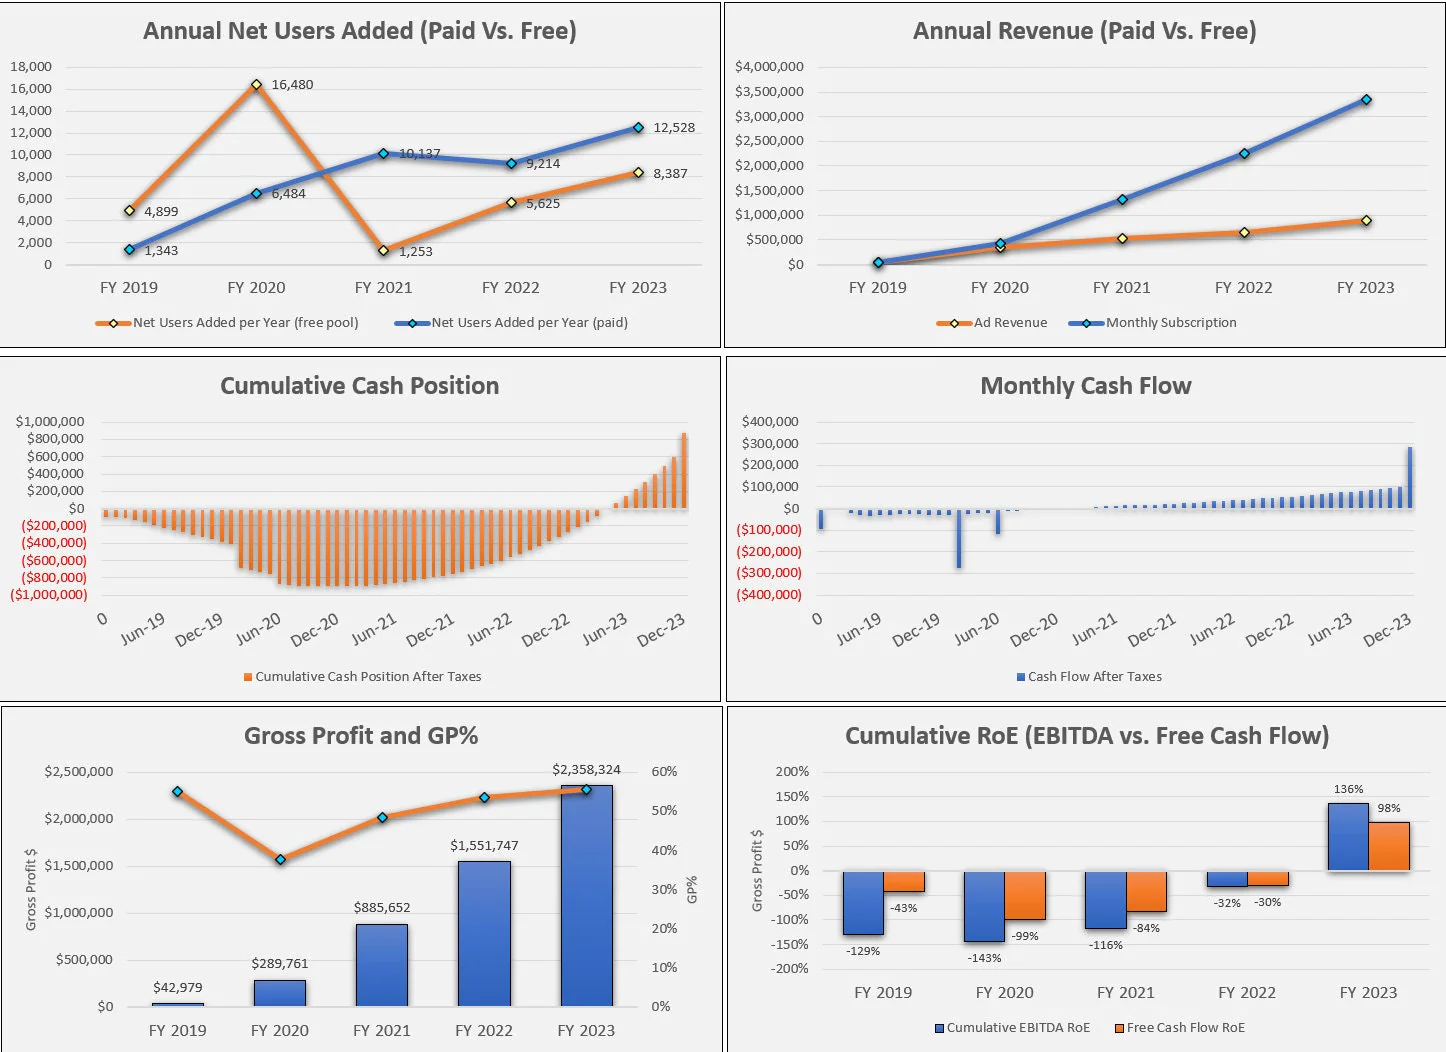 This is a partial preview of Startup Freemium SaaS Financial Model: 5 Year (Excel workbook (XLSX)). 